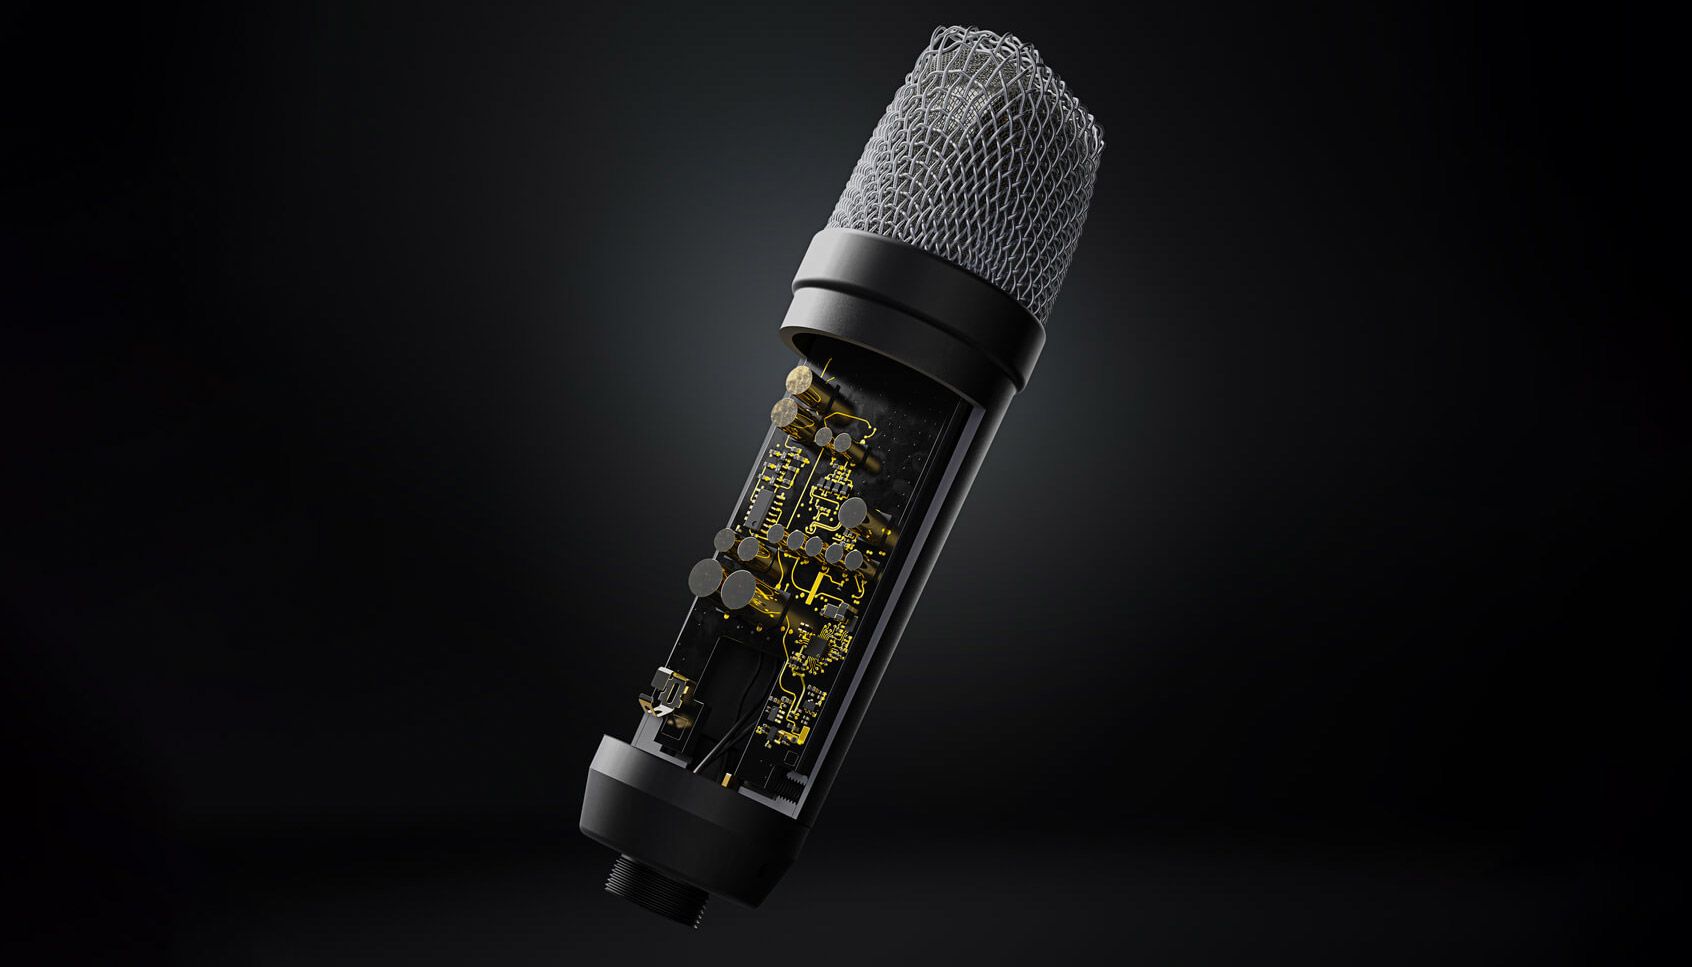 The Rode NT1 5th Generation: A Versatile and High-Quality Microphone